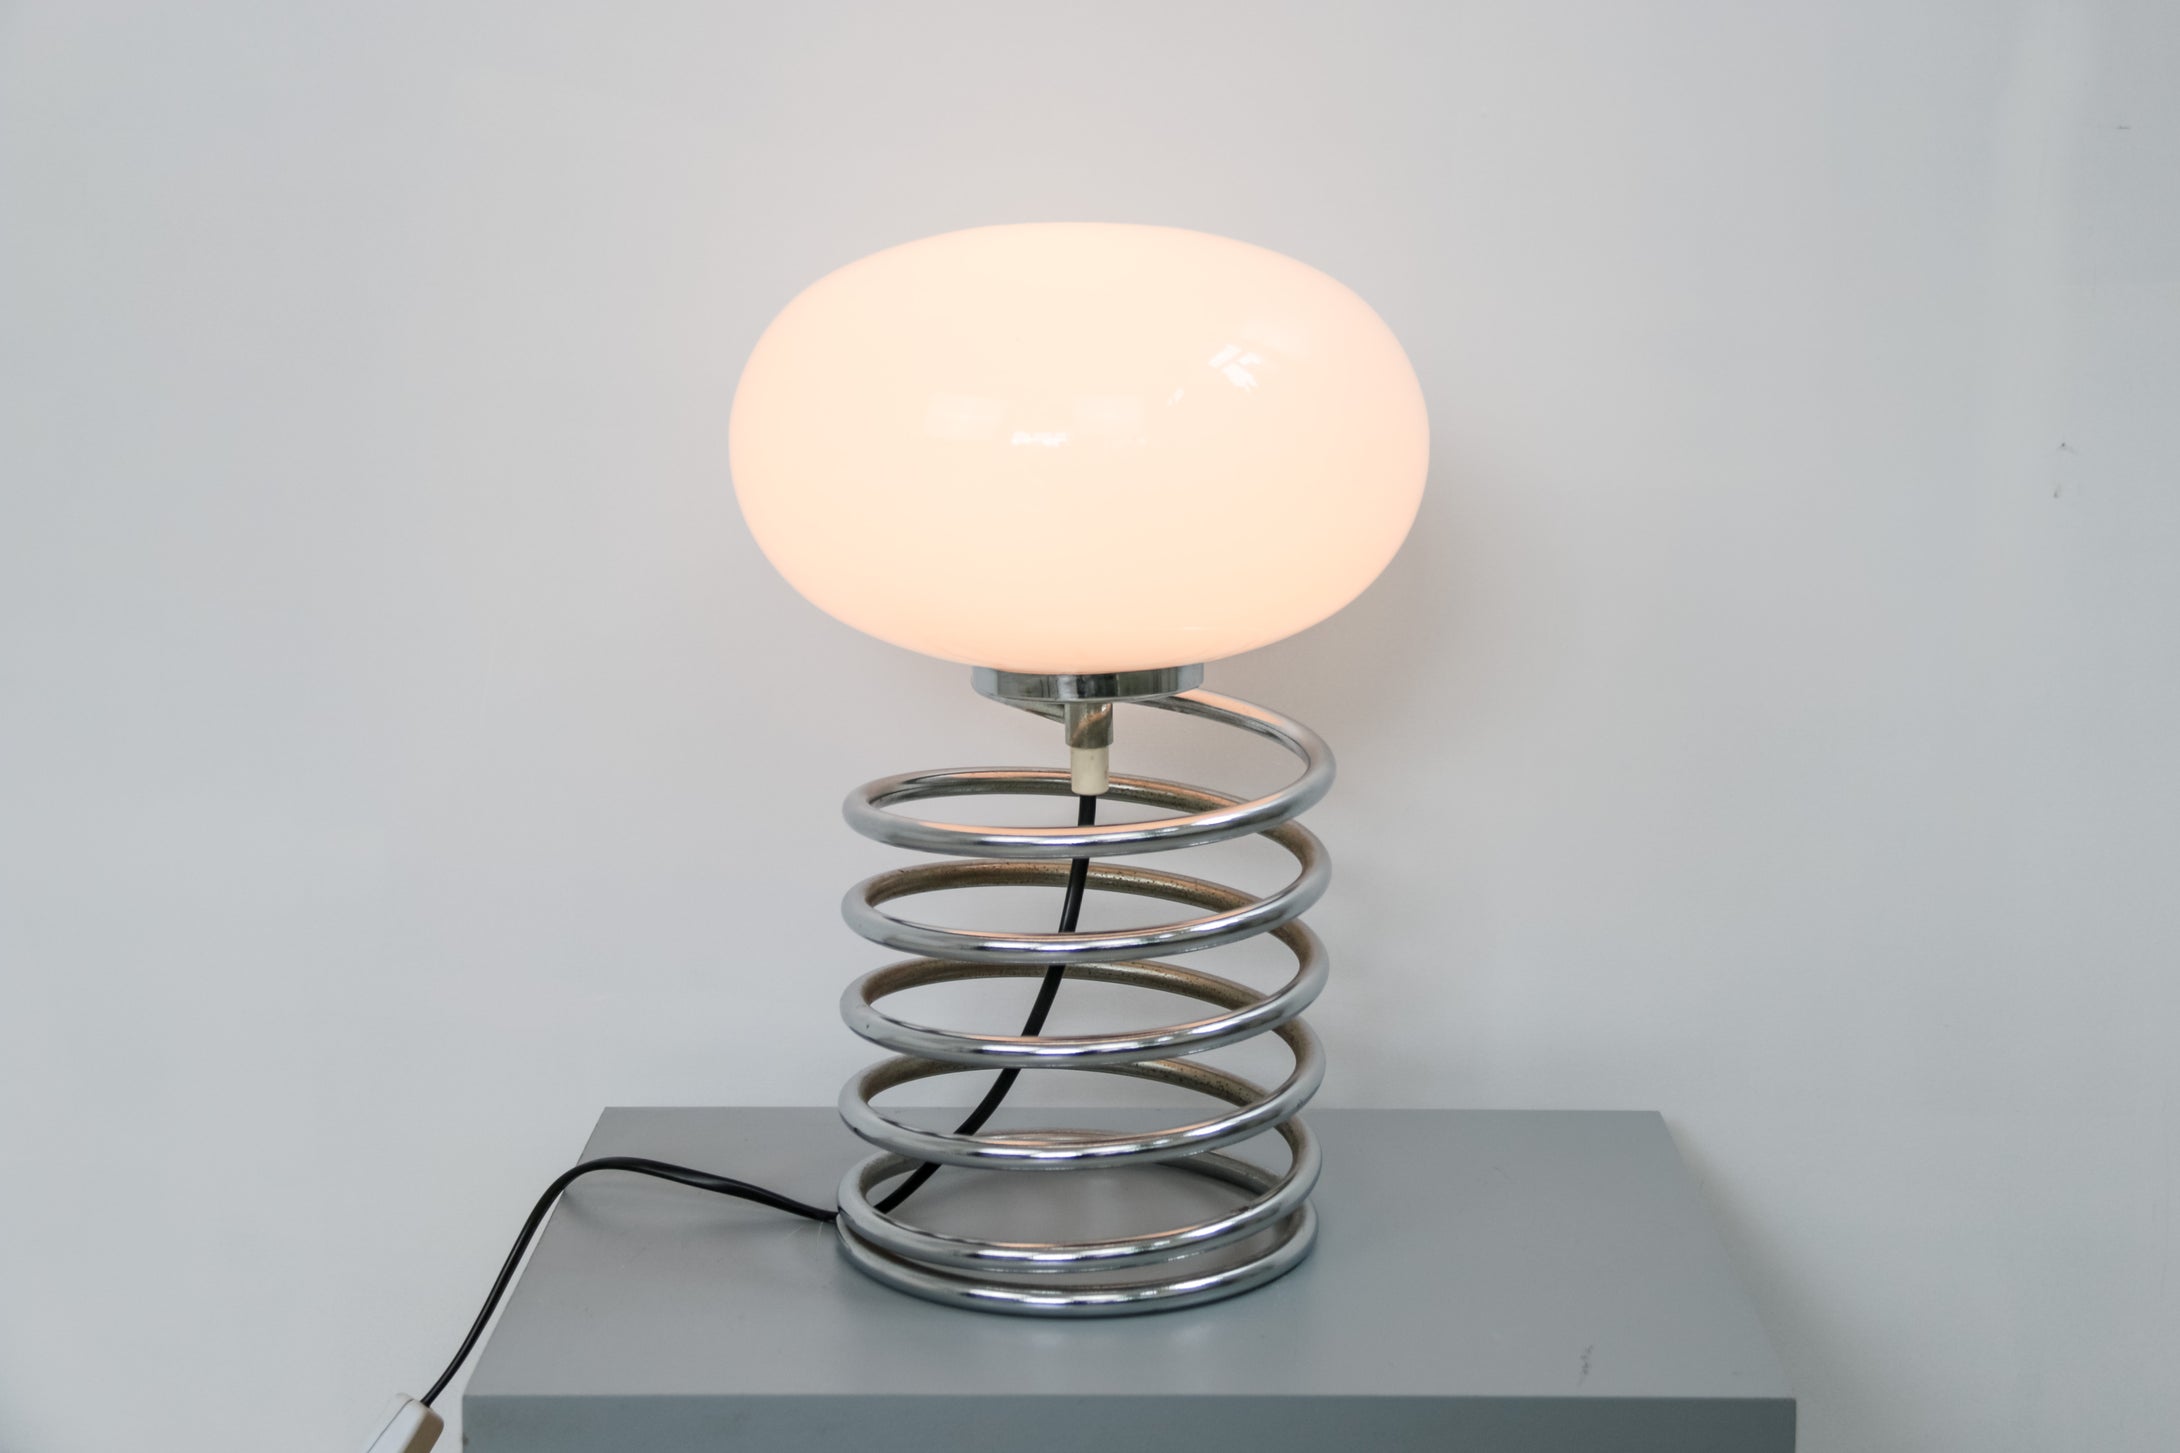 Spiral lamp with white glass shade by Honsel